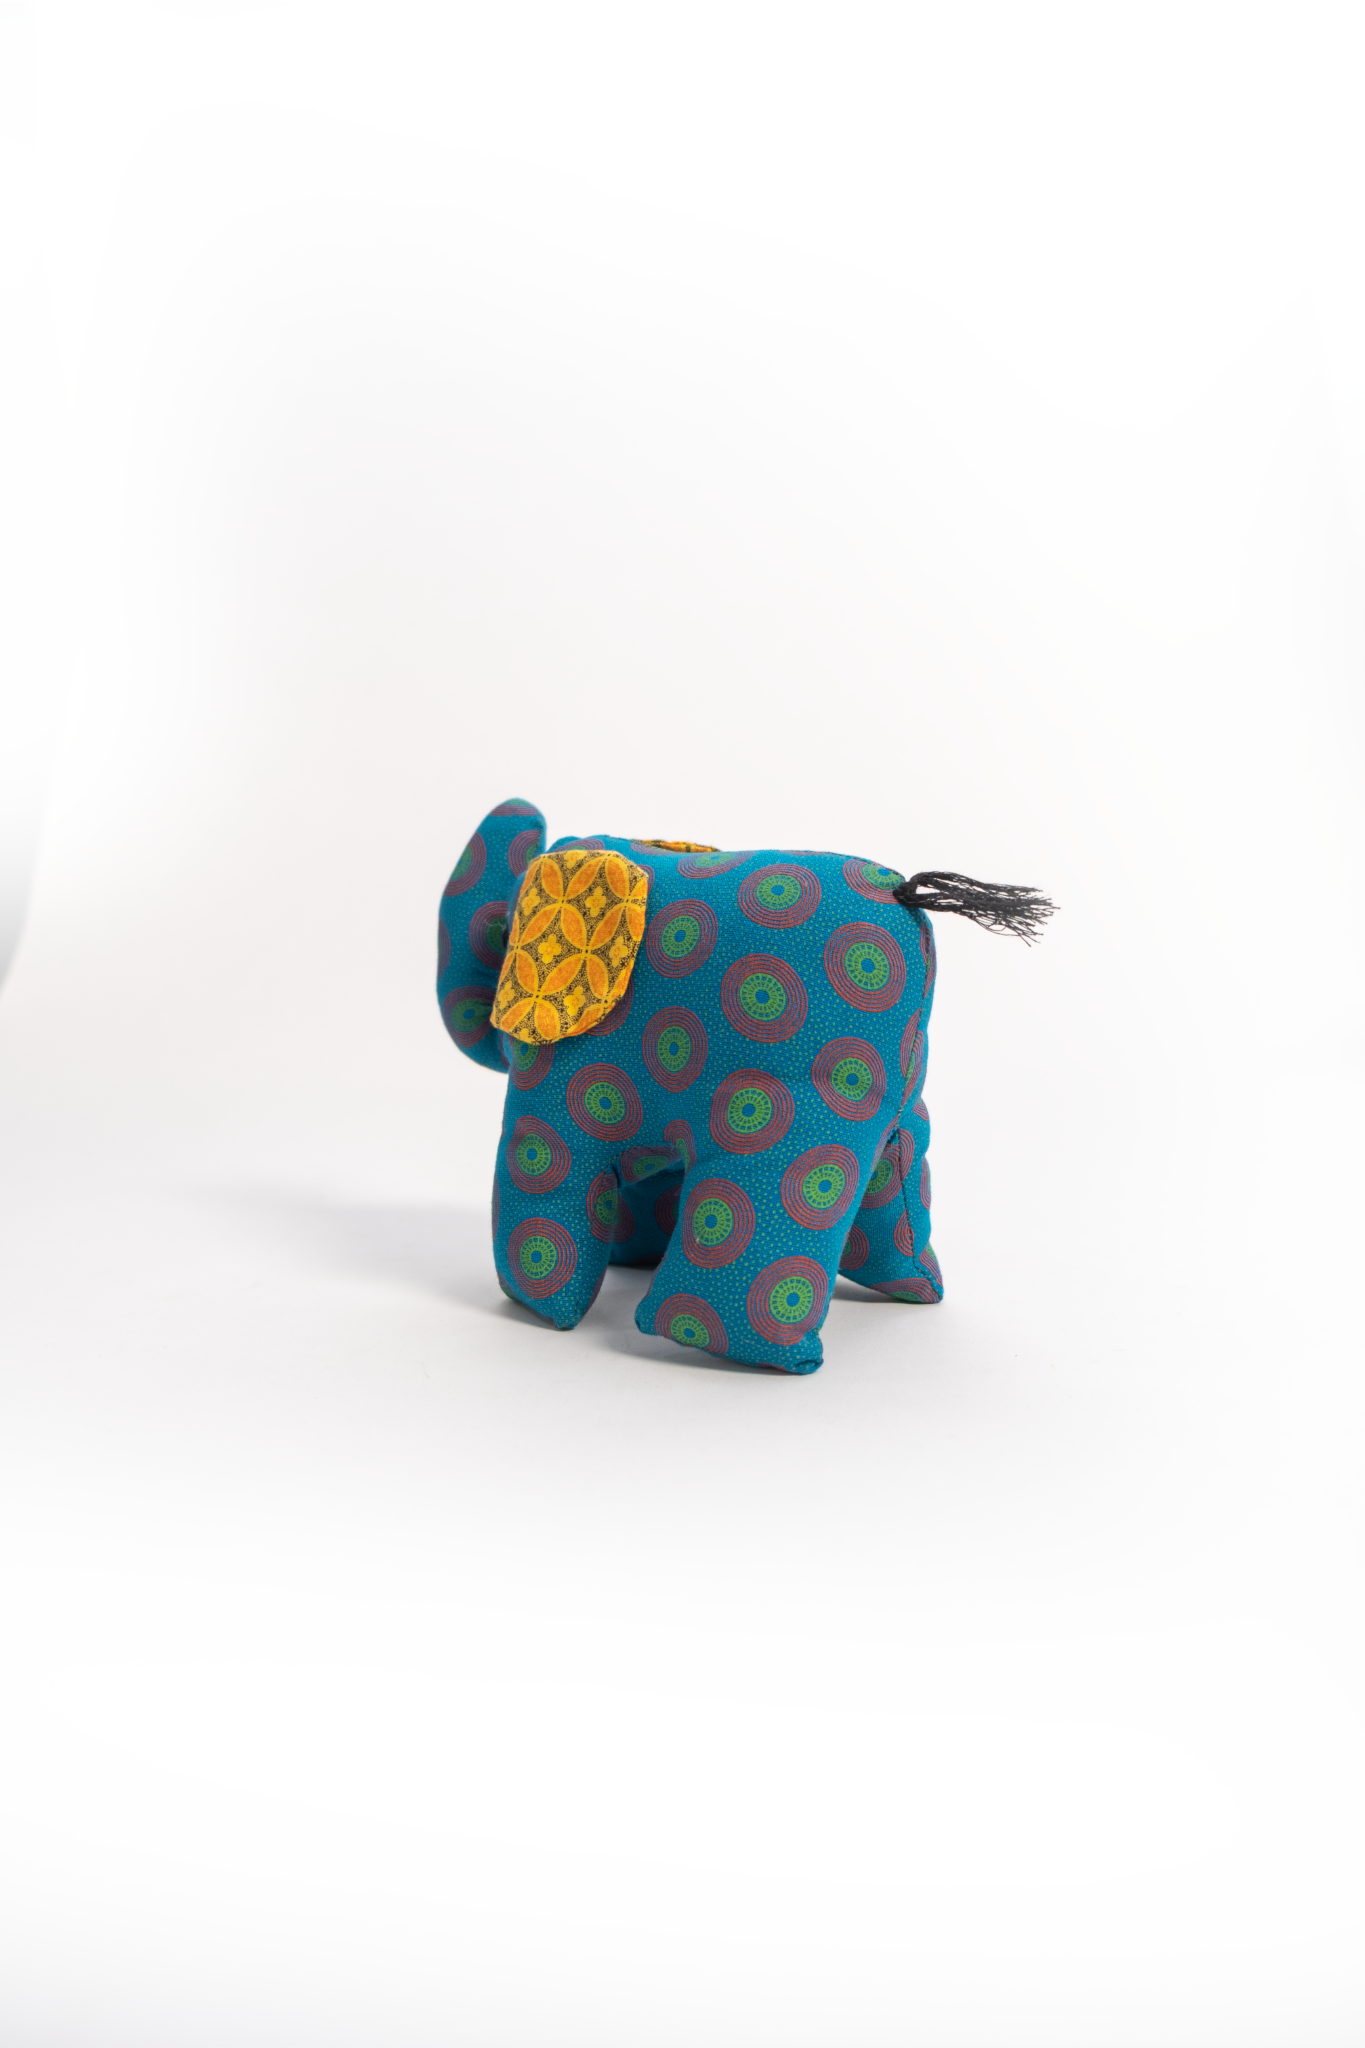 African Cloth Elephant Soft Toy - Small